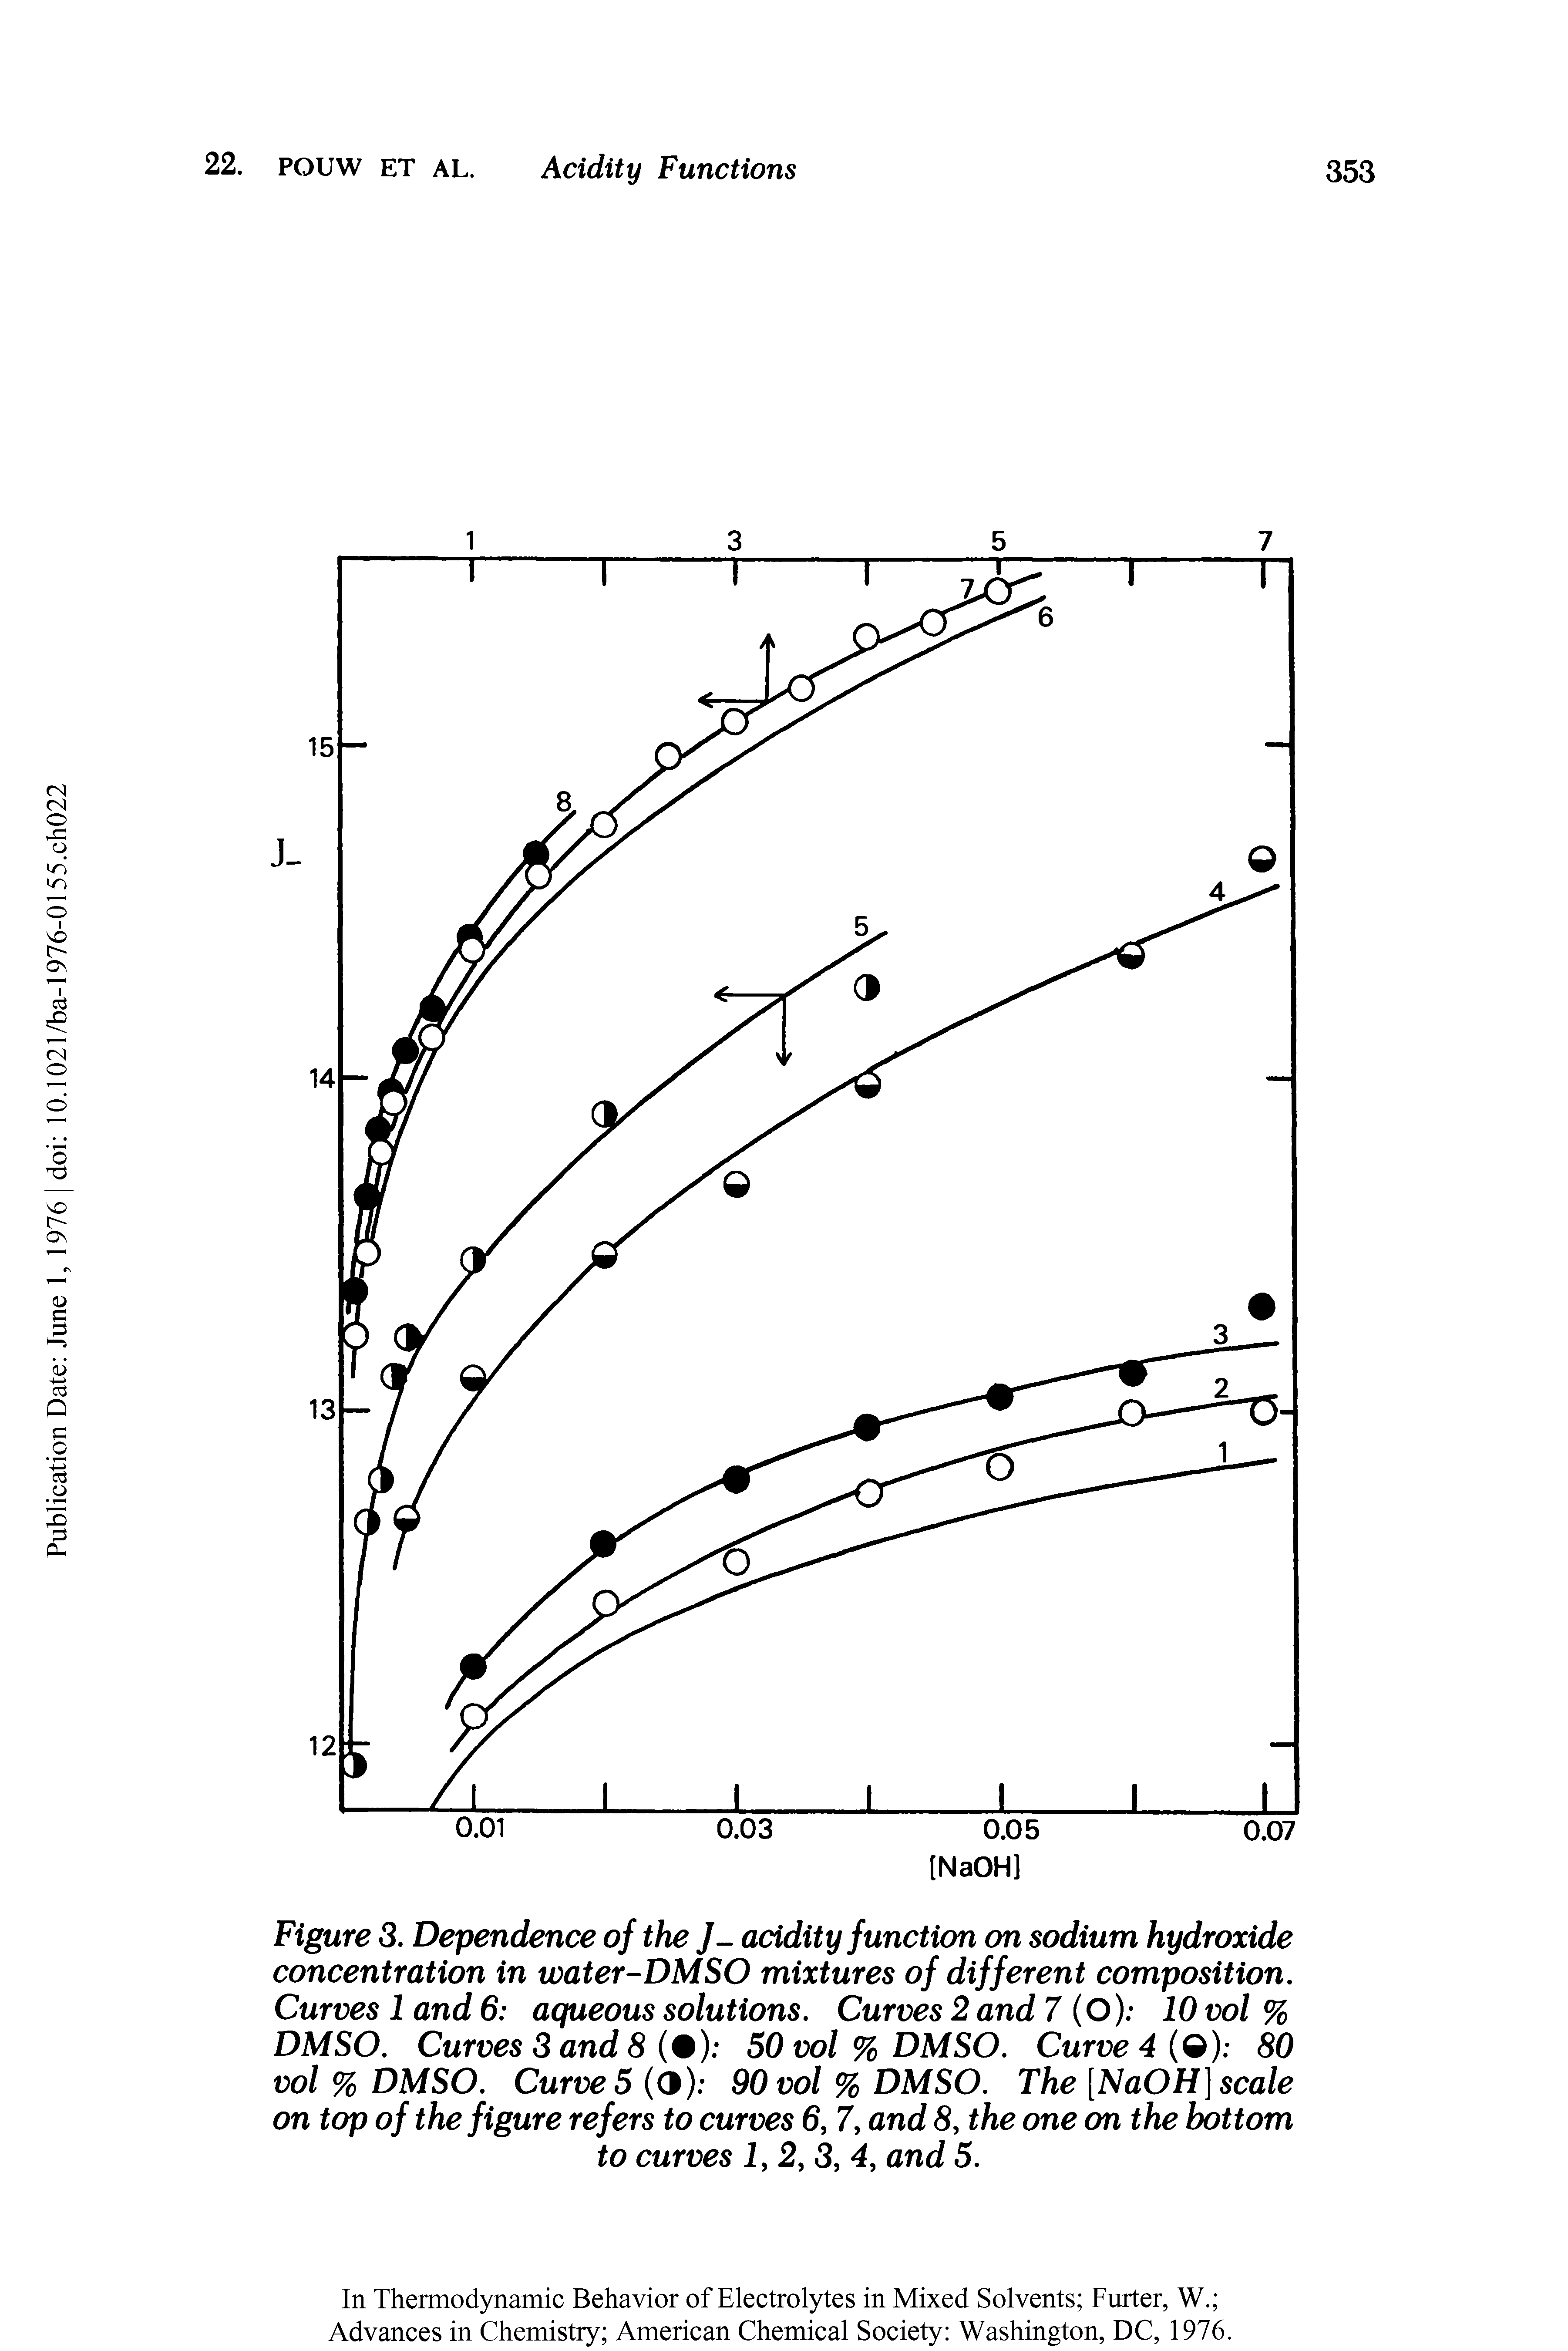 Figure 3. Dependence of the J- acidity function on sodium hydroxide concentration in water-DMSO mixtures of different composition. Curves 1 and 6 aqueous solutions. Curves 2 and 7 (O) 10 vol % DMSO. Curves 3 and 8 ( ) 50 vol % DMSO. Curve 4 ( ) 80 vol % DMSO. Curve 5 (3) 90 vol % DMSO. The [NaOH] scale on top of the figure refers to curves 6, 7, and 8, the one on the bottom to curves 1,2,3, 4, and 5.